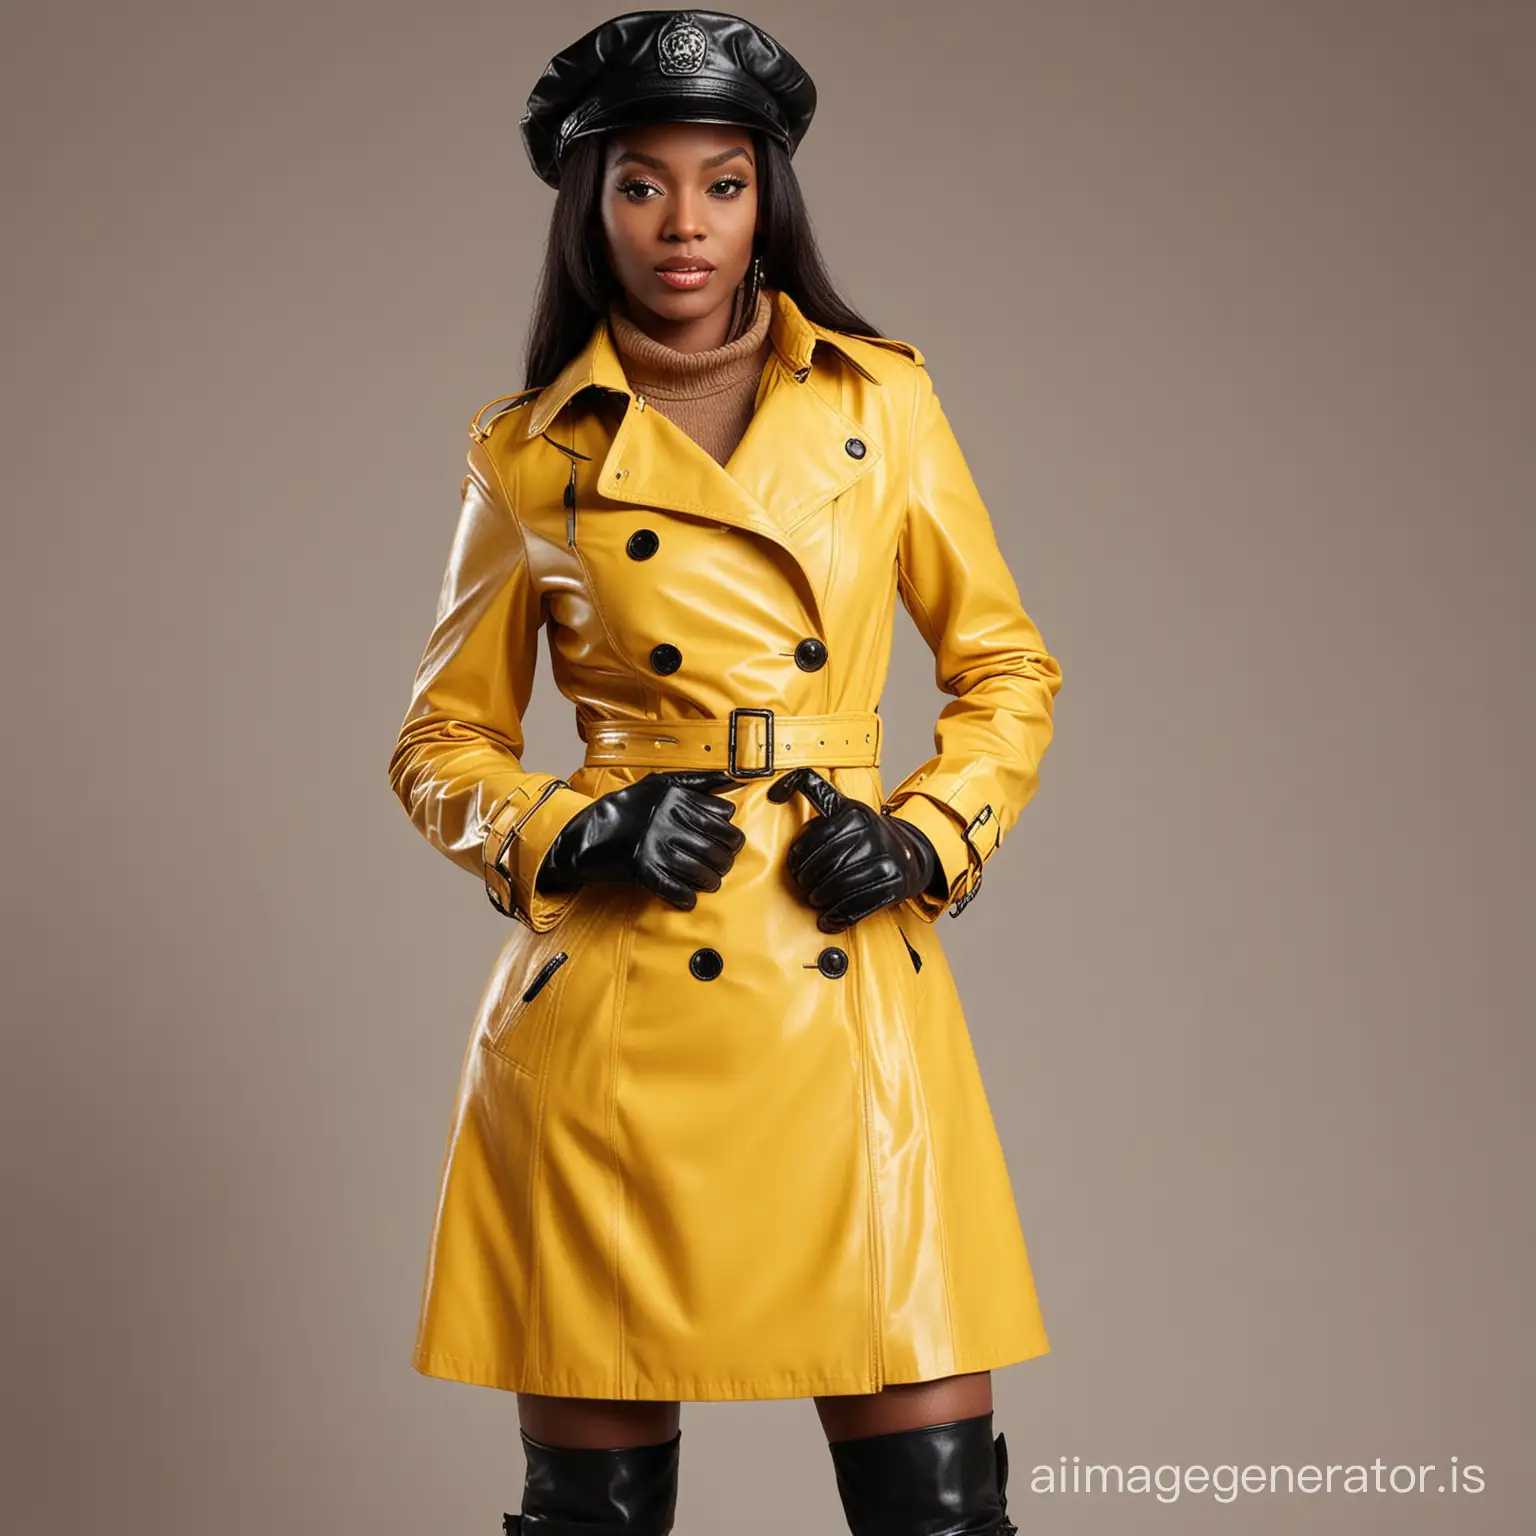 Stylish-Black-Woman-in-Yellow-Leather-Trench-Coat-and-Gloves-with-Master-Cap-and-Boots